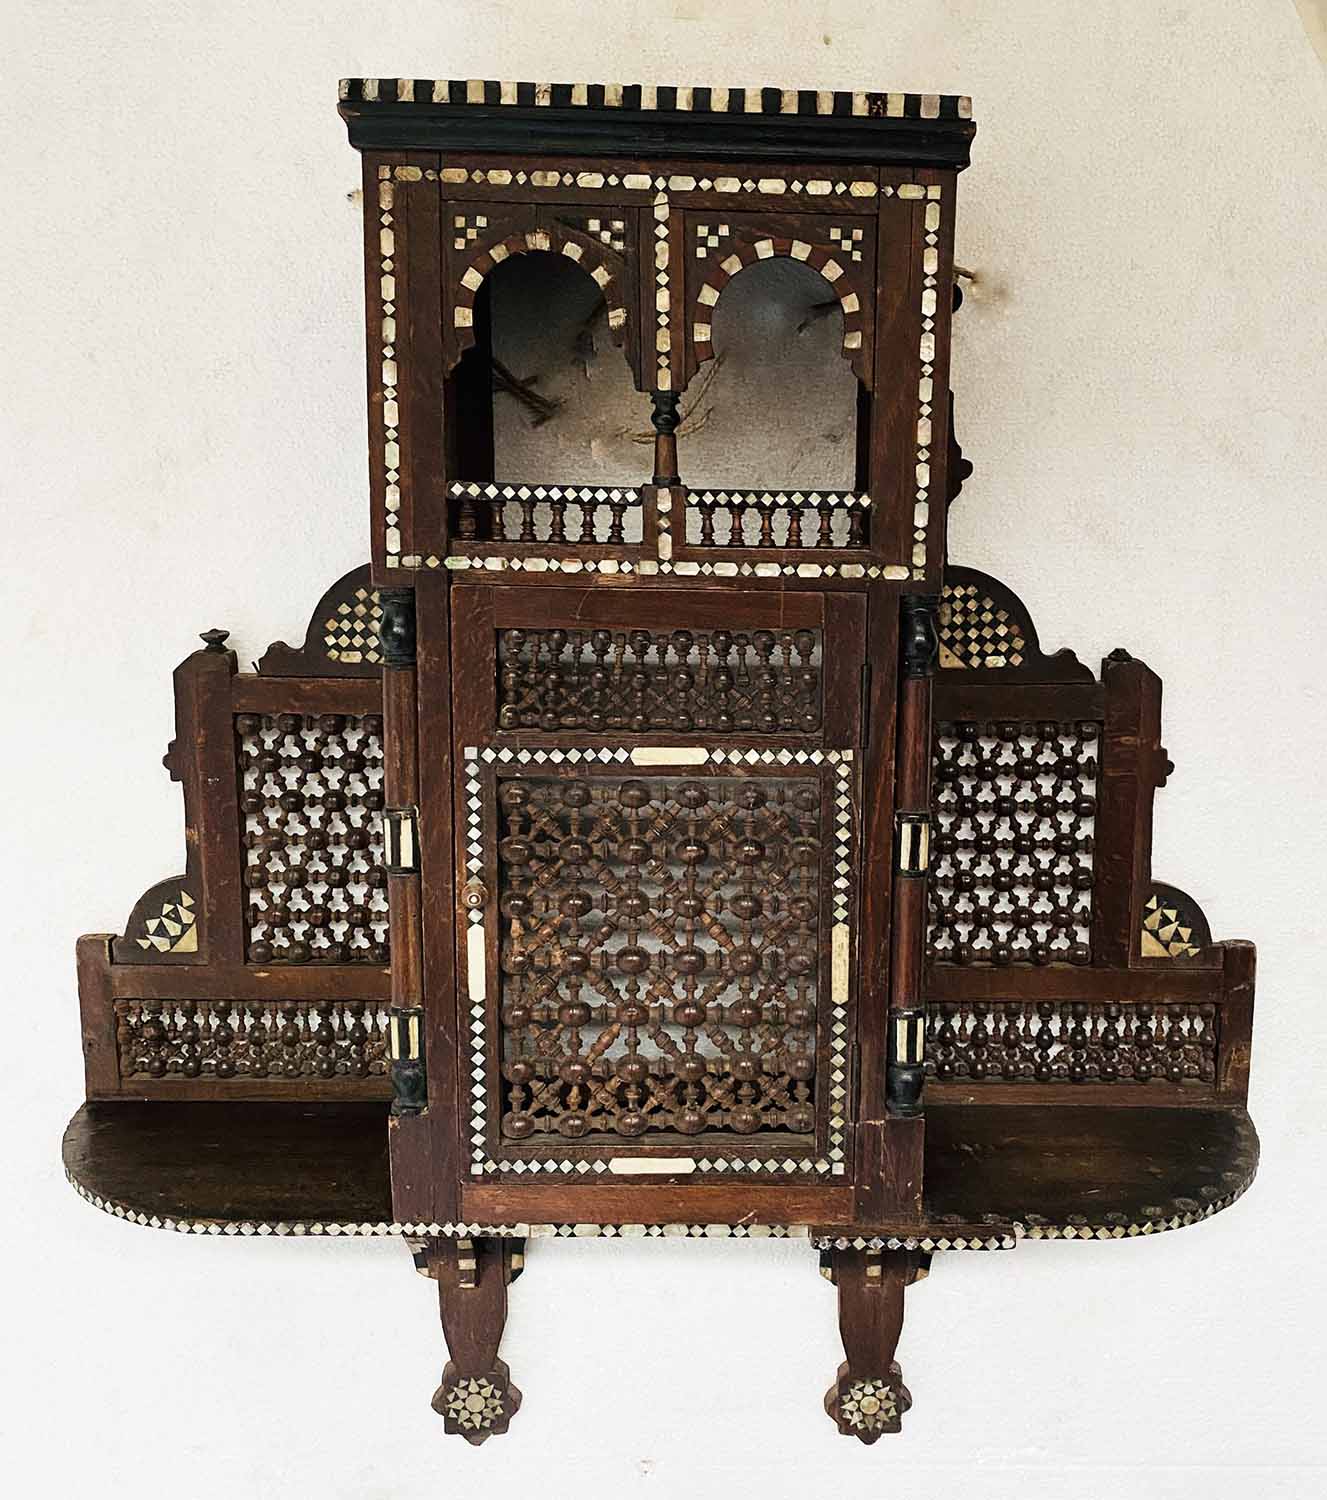 MOORISH WALL CABINET, early 20th century, bone and mother of pearl inset hardwood,